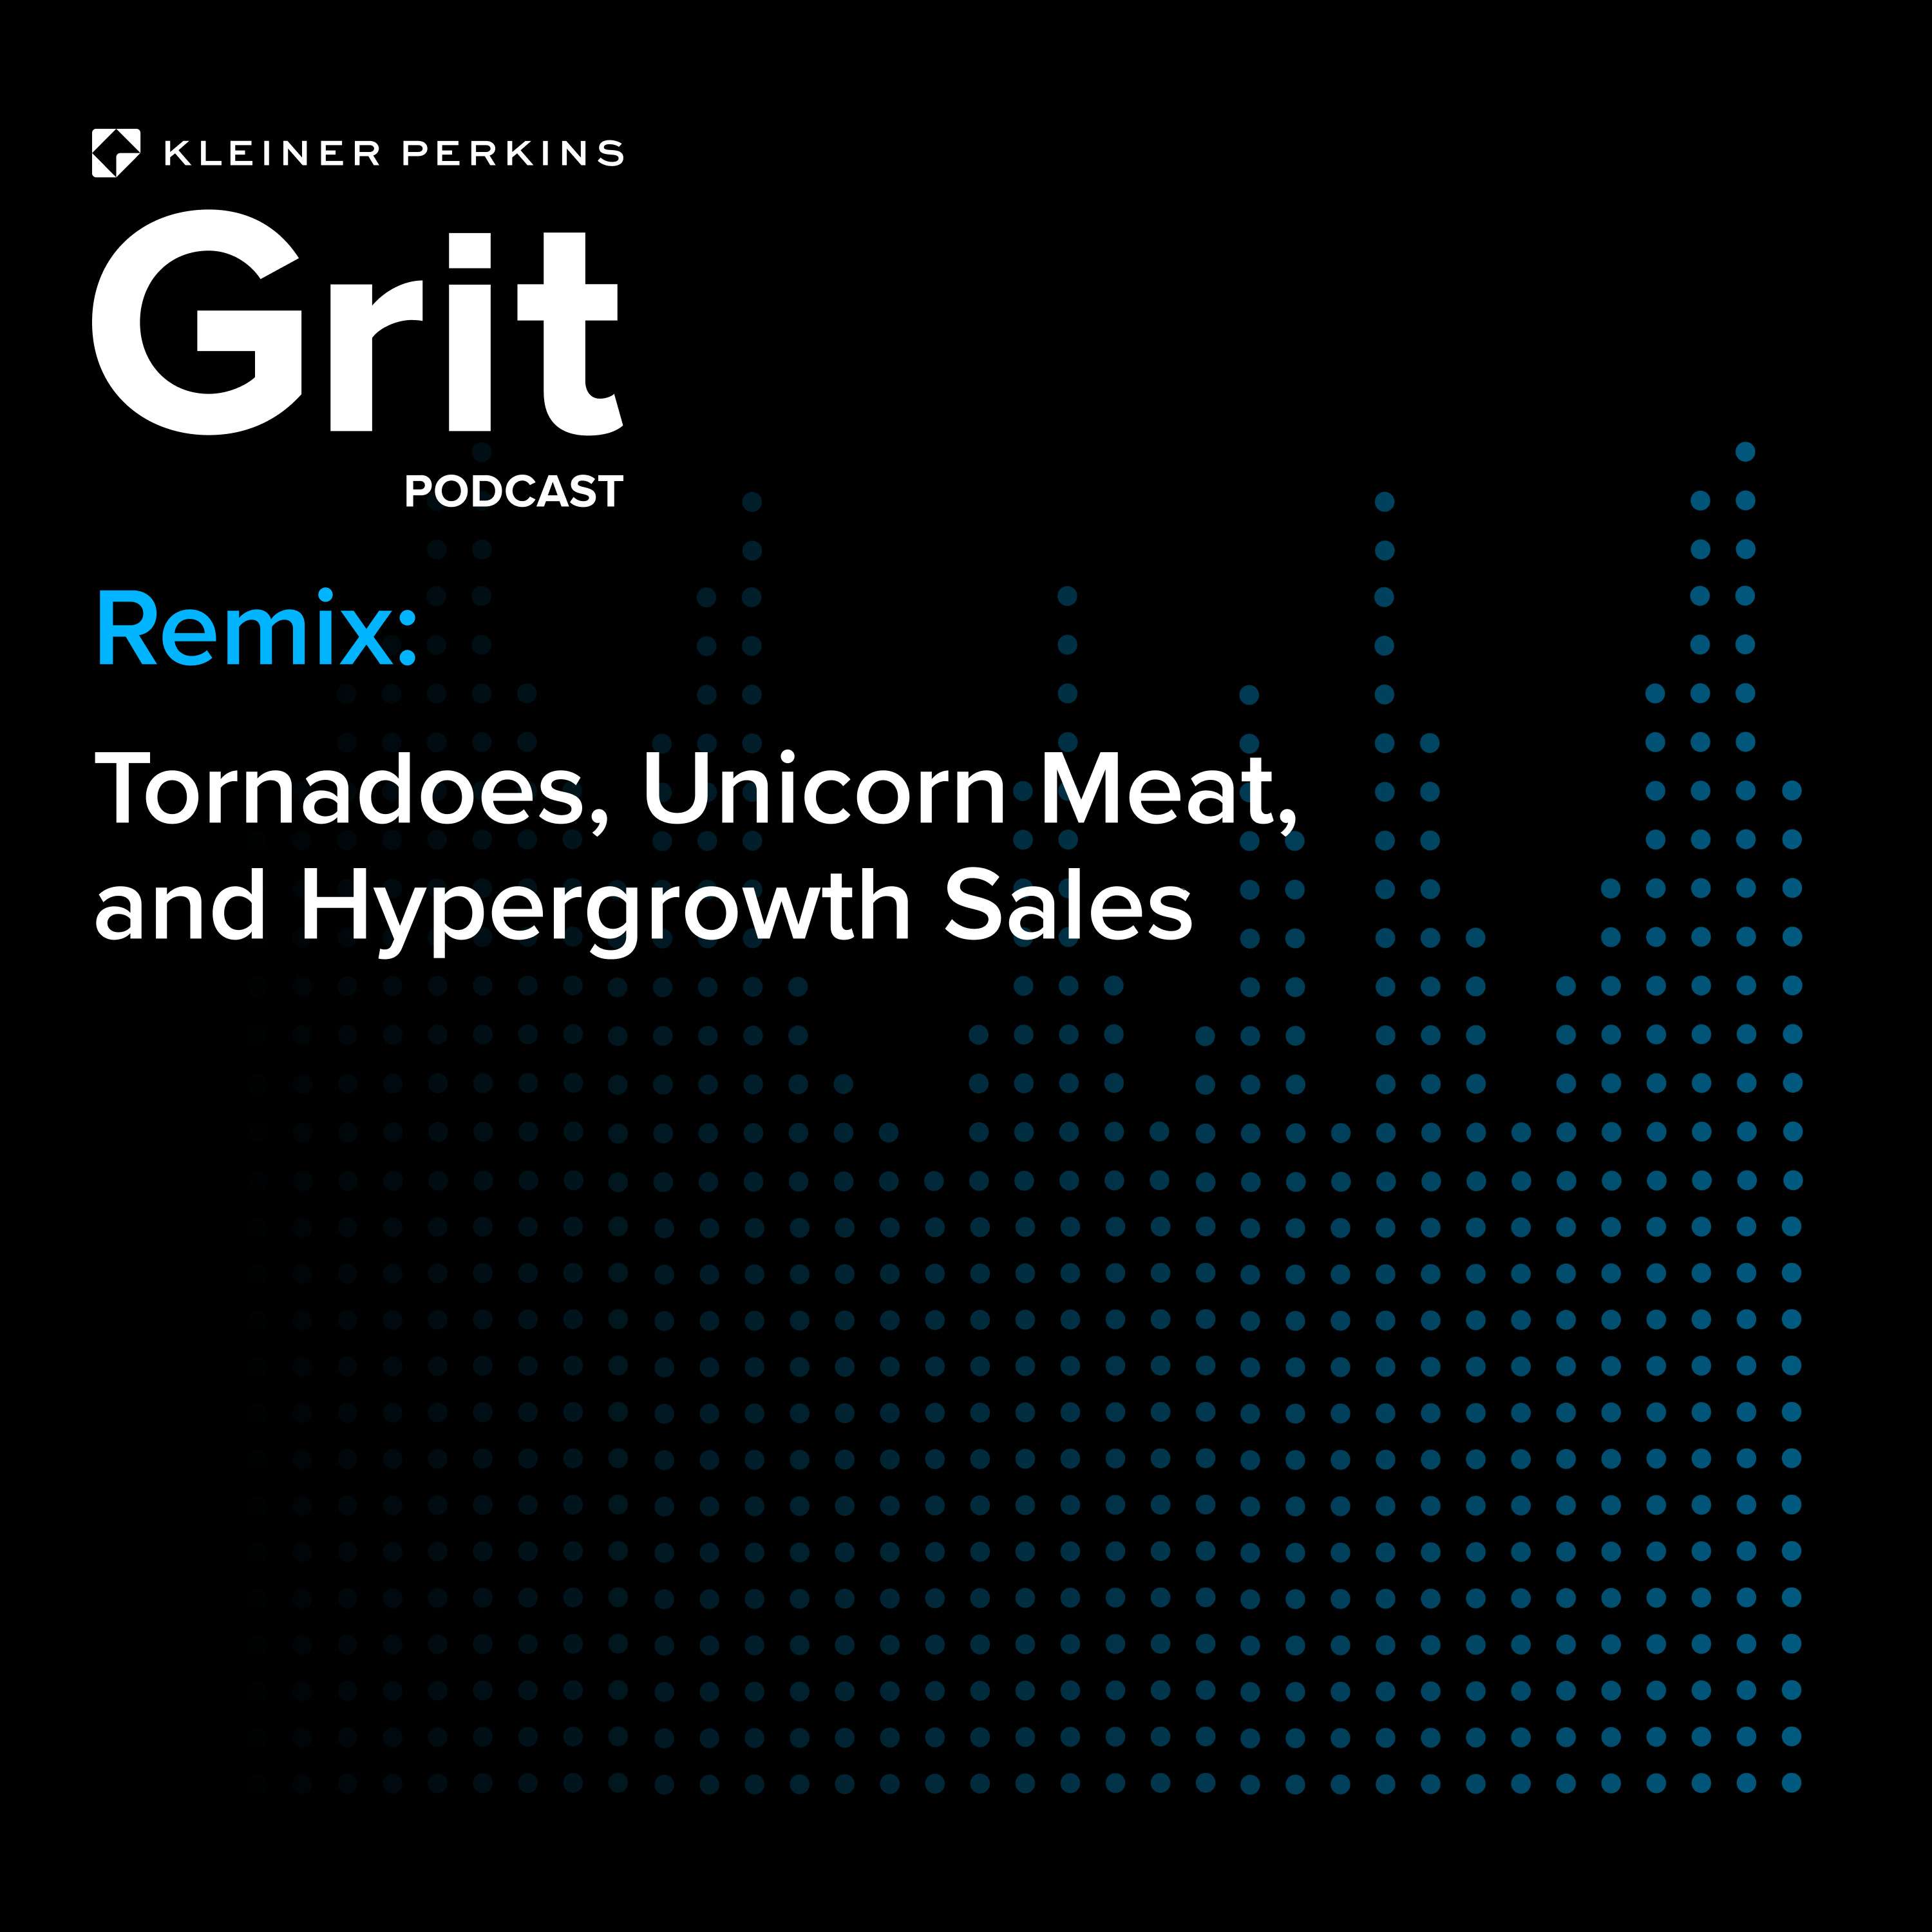 #154 Remix: Tornadoes, Unicorn Meat, and Hypergrowth Sales